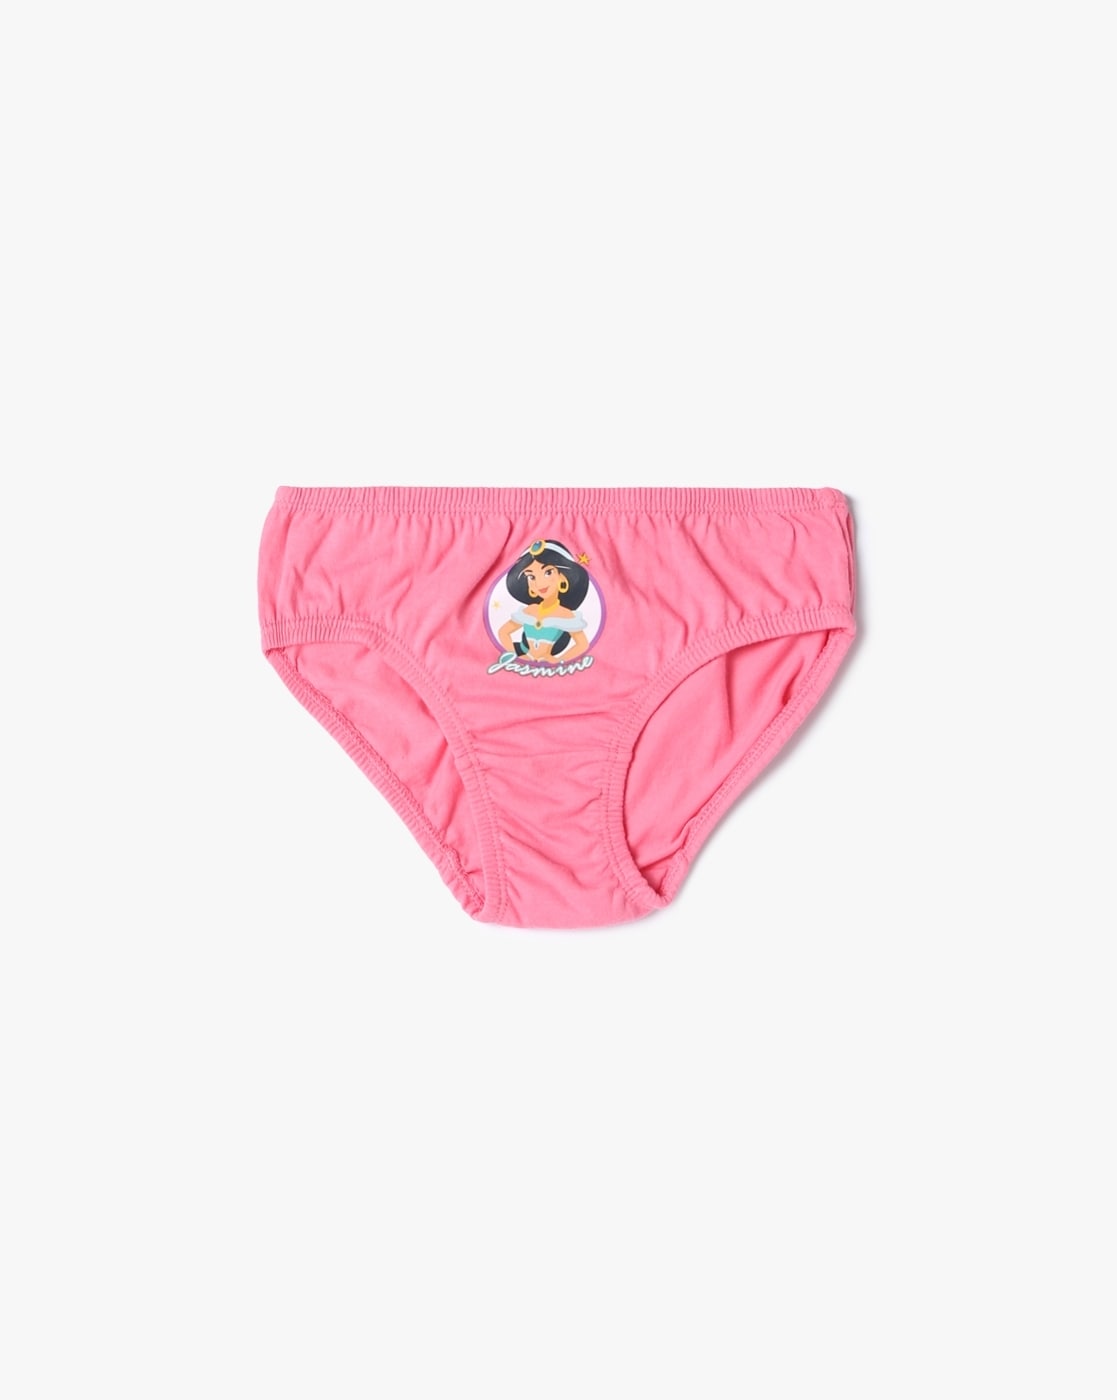 Buy Multicoloured Panties & Bloomers for Girls by RIO GIRLS Online